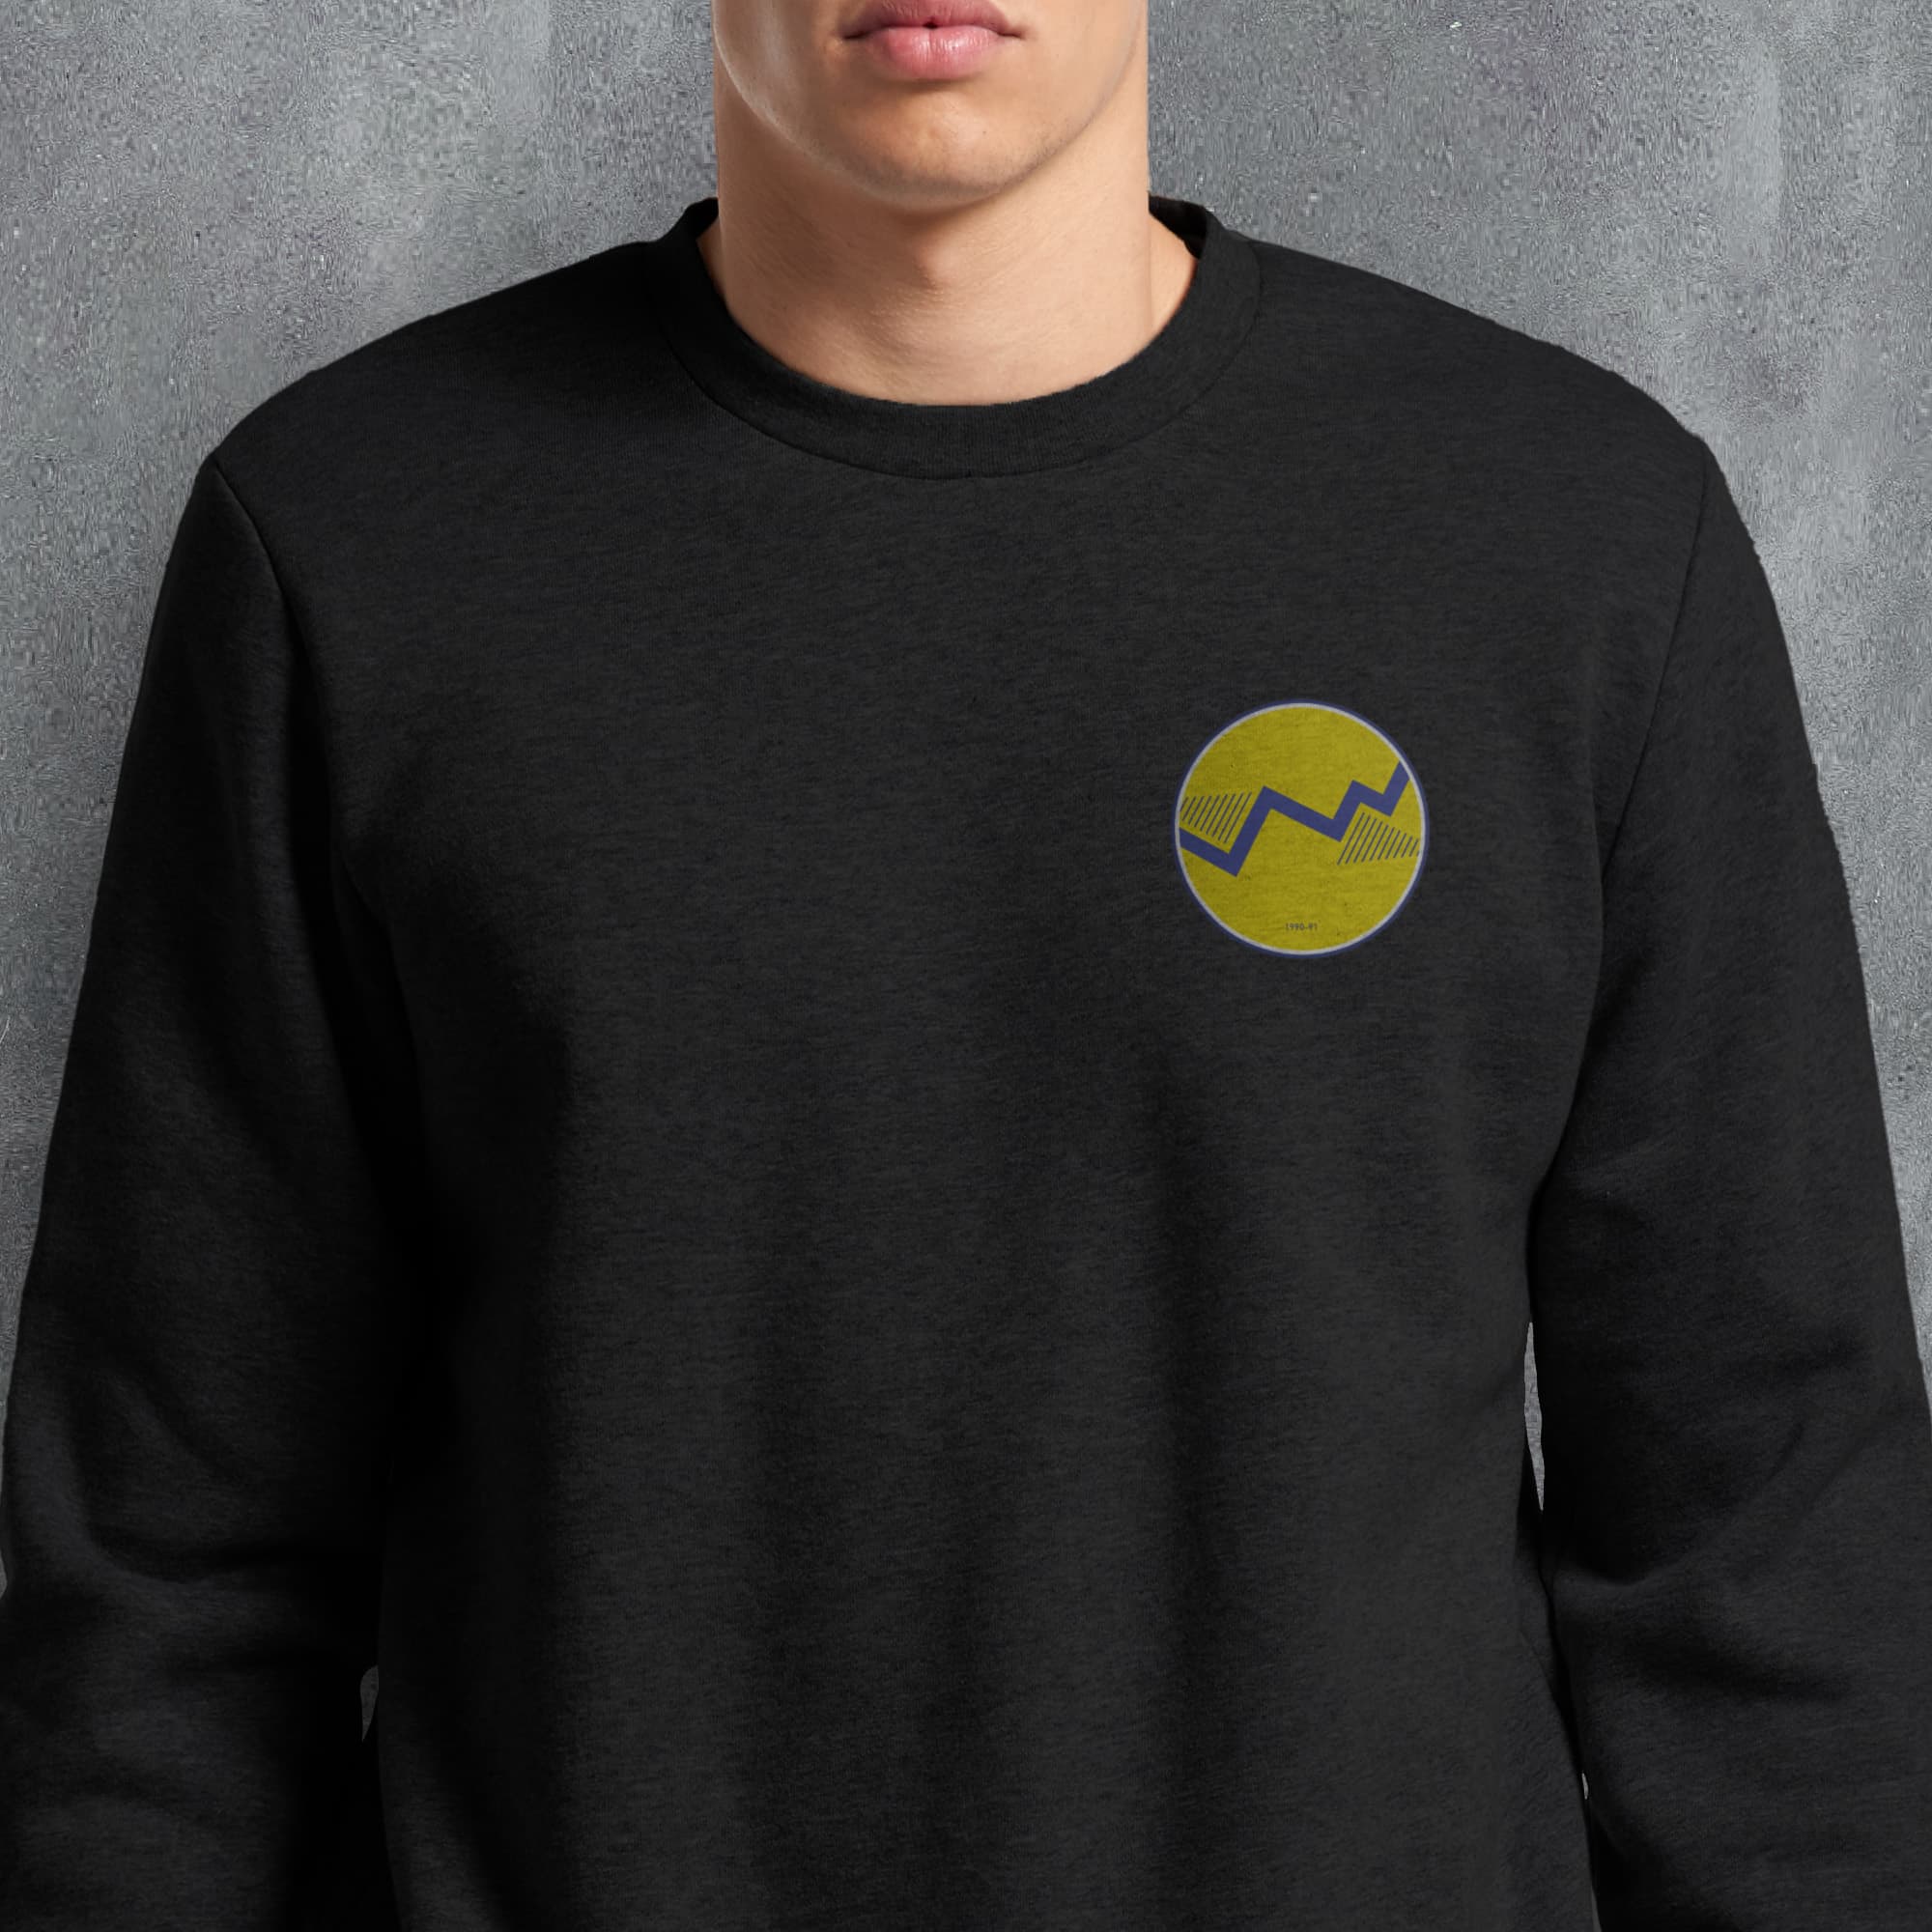 a man wearing a black sweatshirt with a yellow smiley face